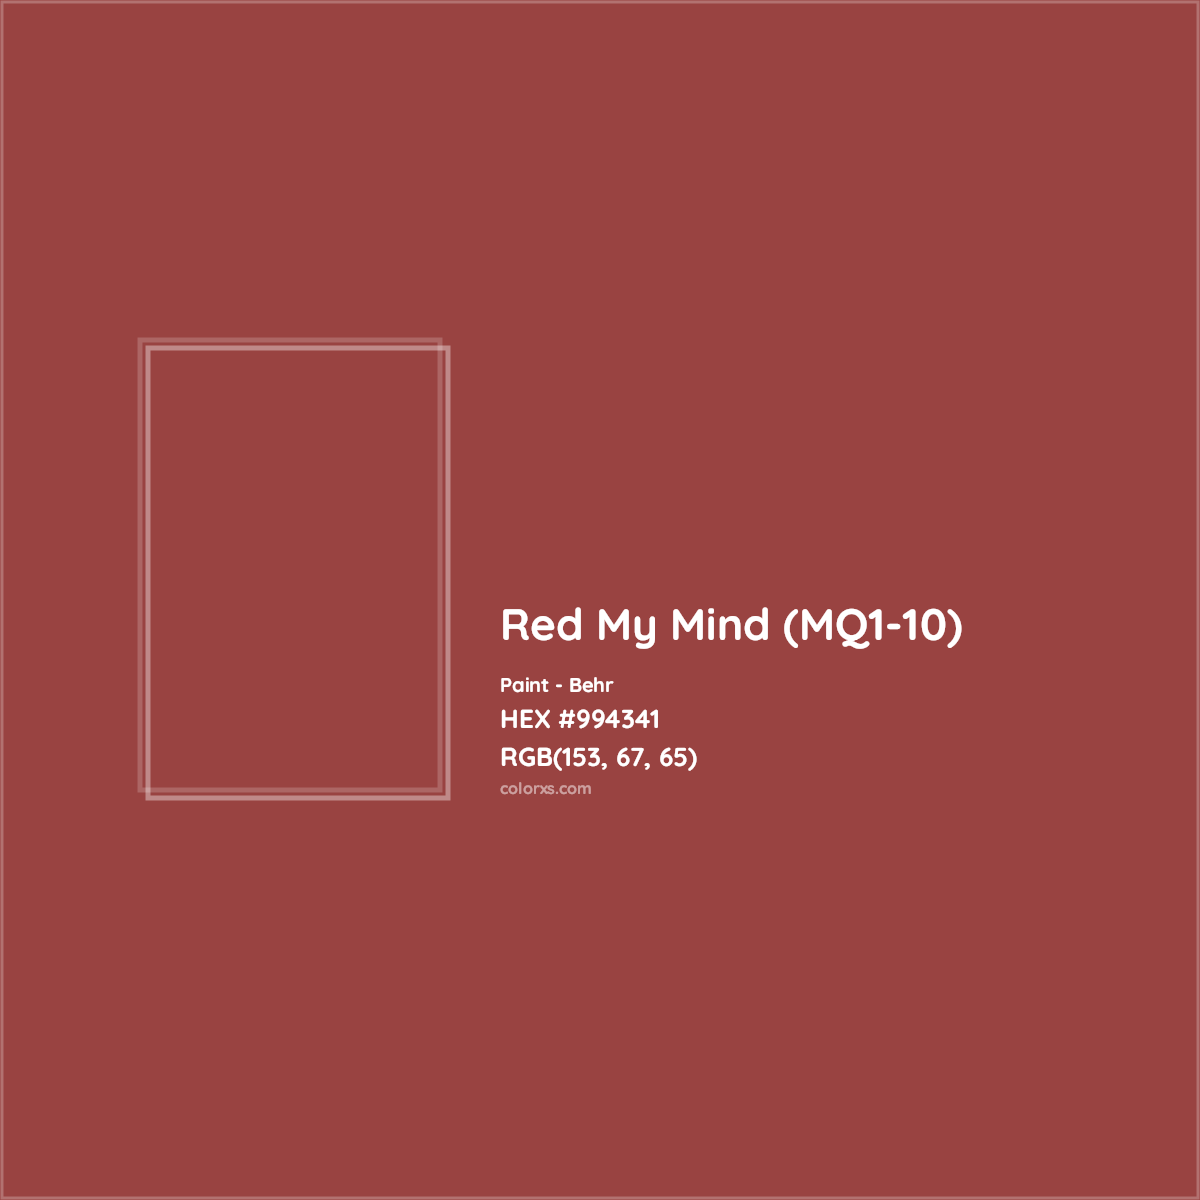 HEX #994341 Red My Mind (MQ1-10) Paint Behr - Color Code